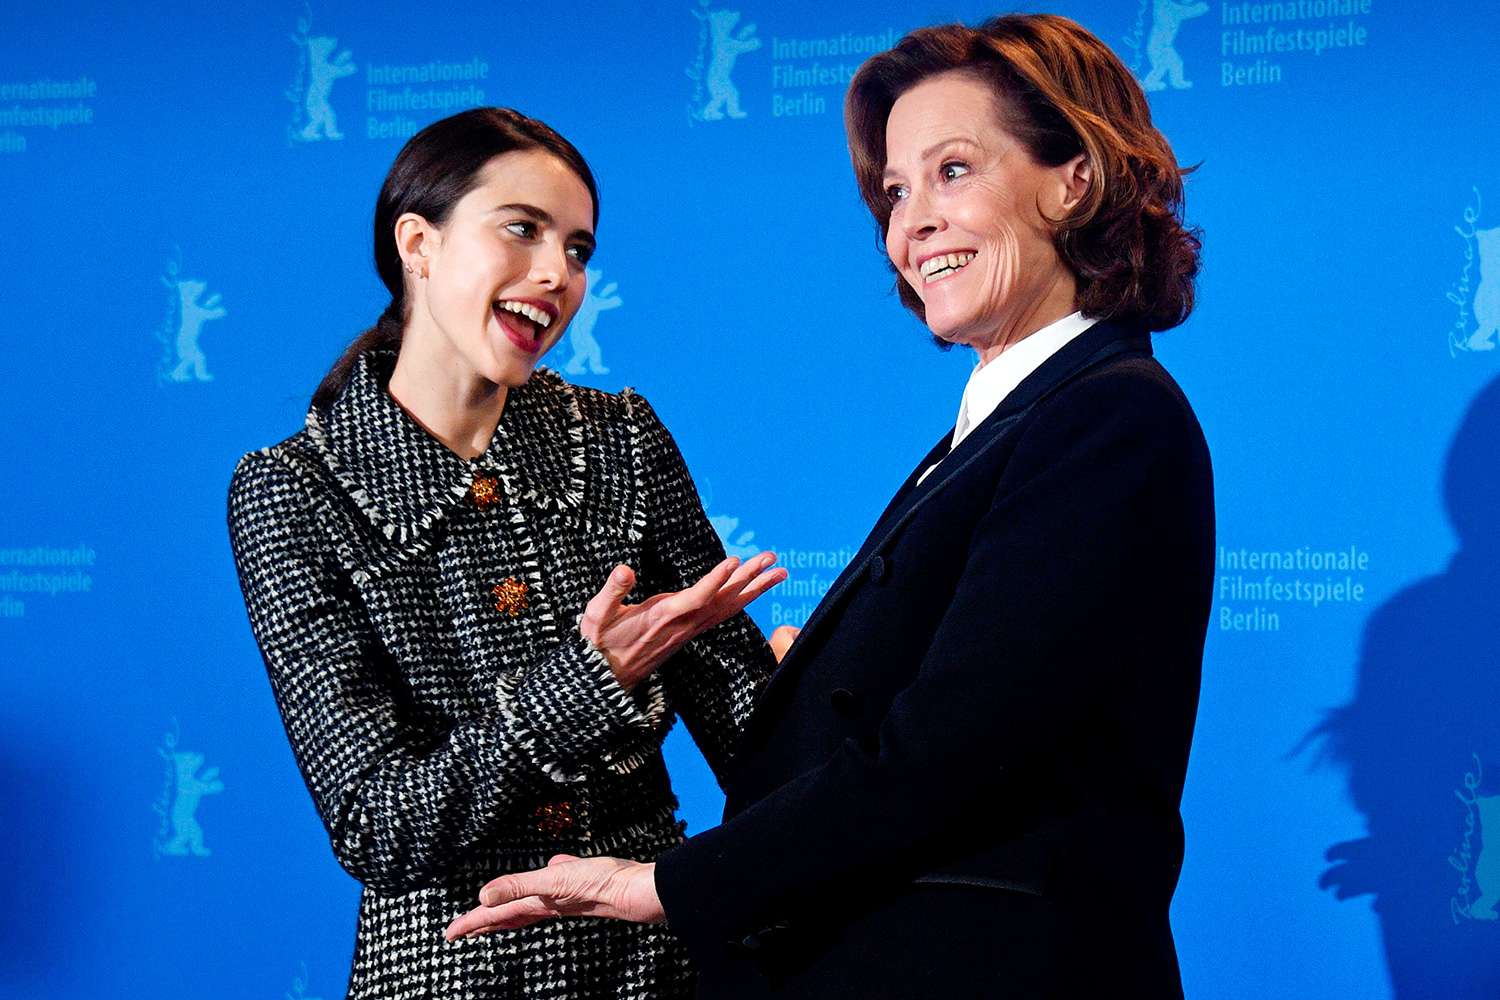 Margaret Qualley (L) and US actress Sigourney Weaver pose for medias during a photocall for the film "My Salinger year" screened at the Berlinale Special Gala in Berlin on February 20, 2020